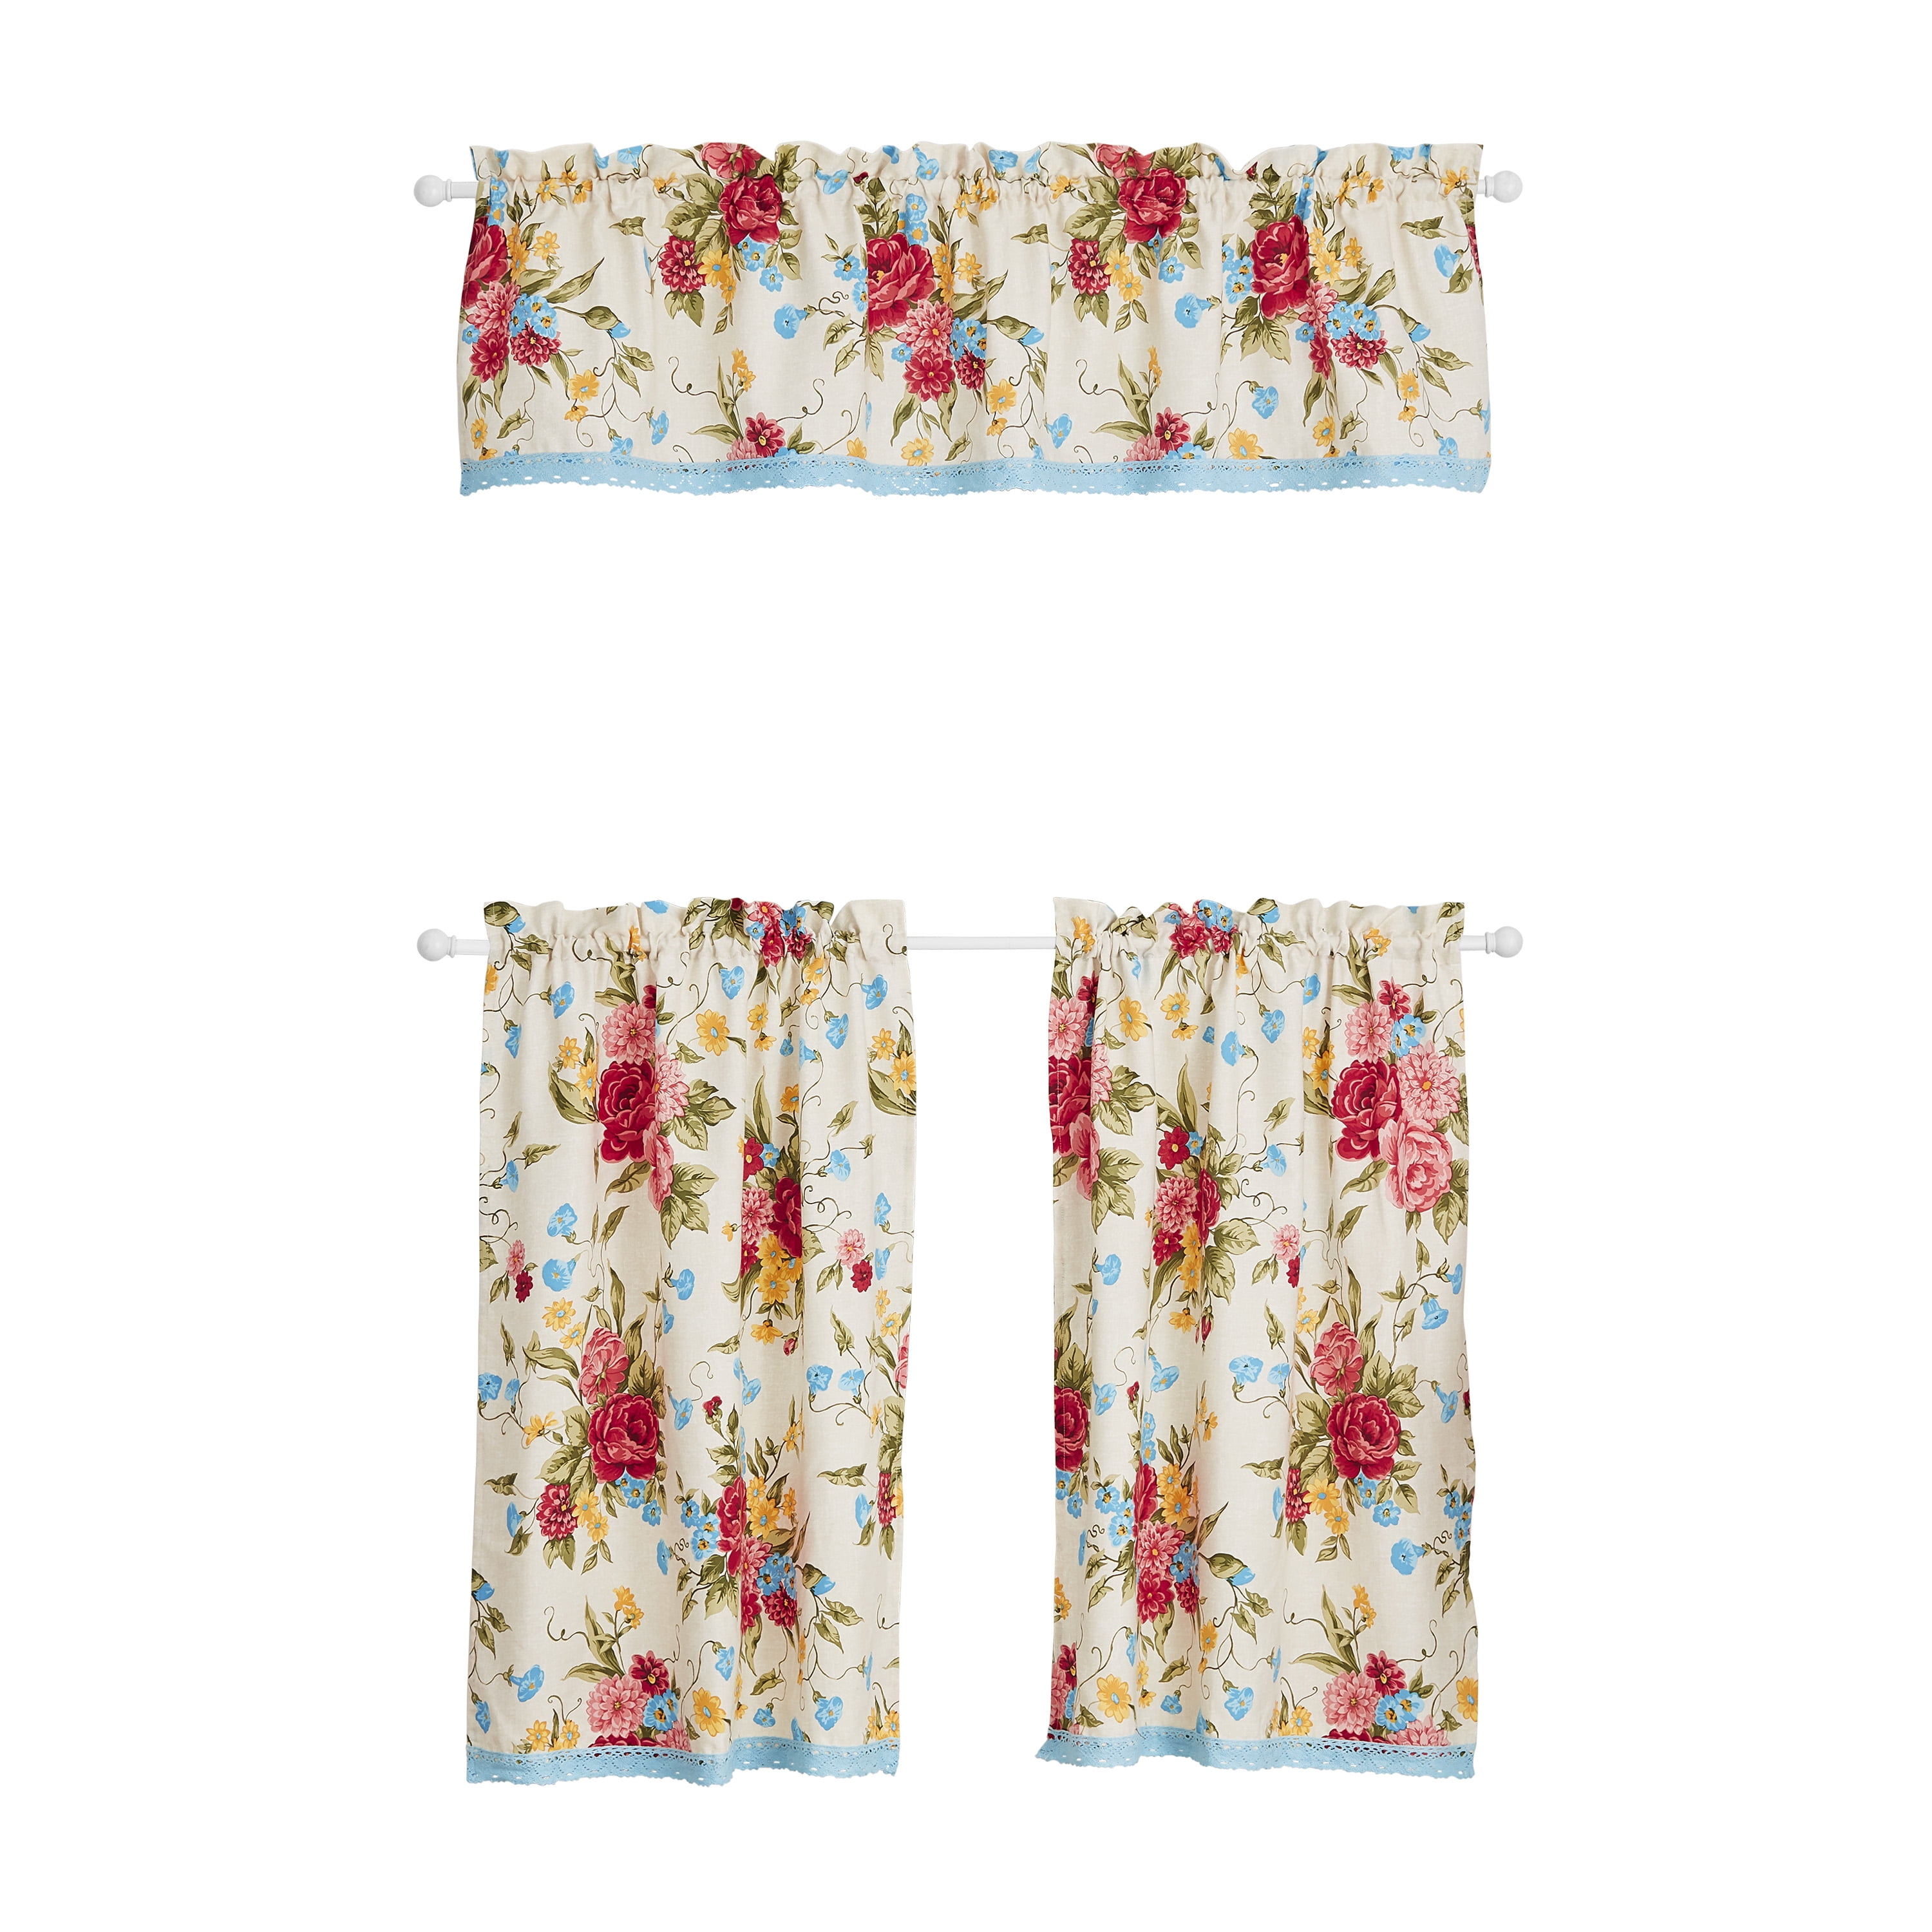 The Pioneer Woman Sweet Rose 3-Piece Tier & Valance Set